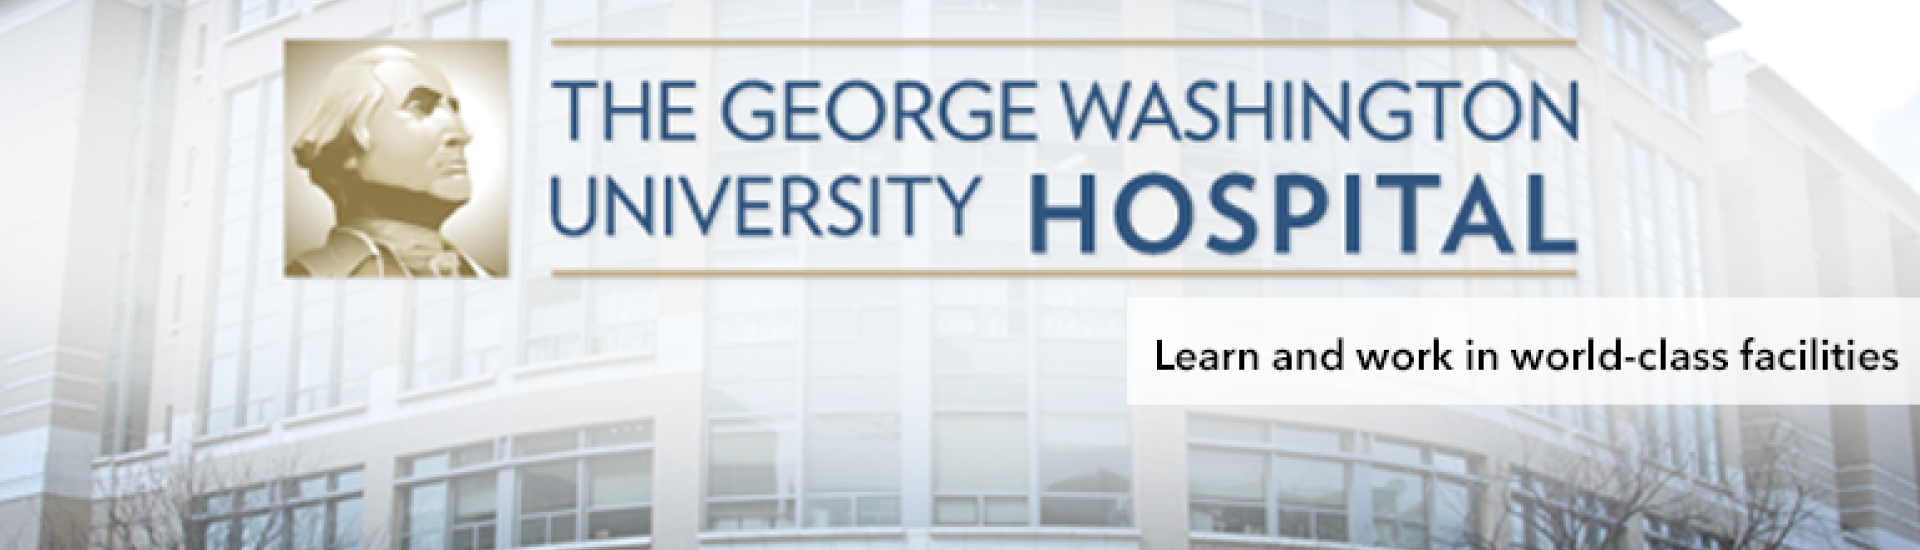 GW Hospital Banner: Learn and Work in world-class facilities